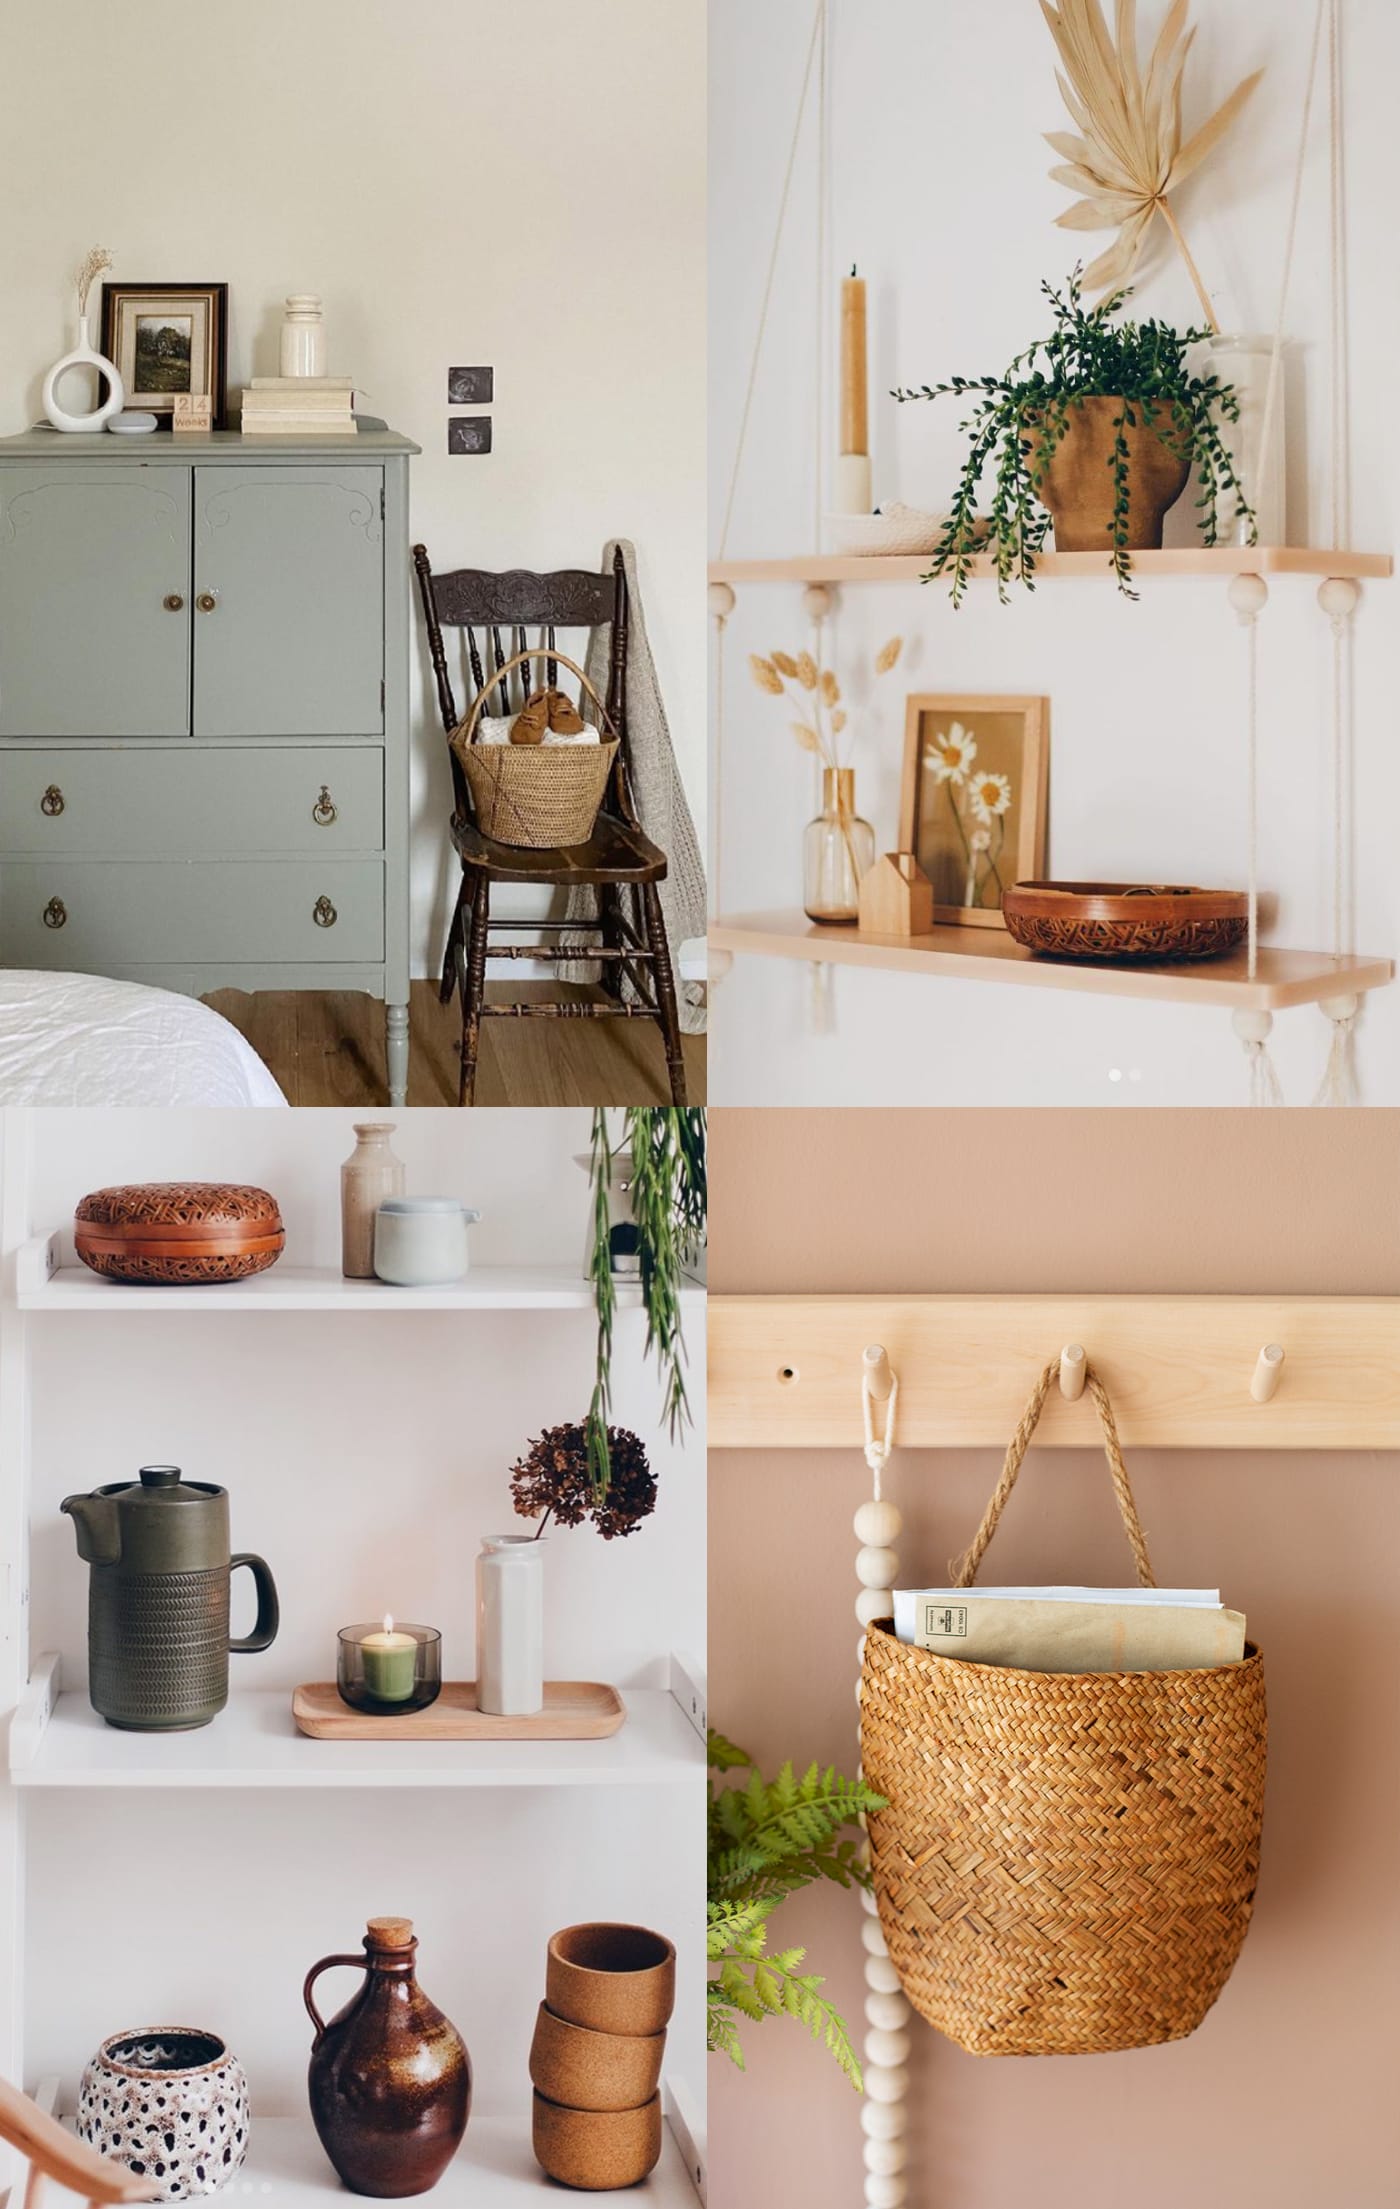 Where to Buy Cute Home Decor & More If You're on a Budget